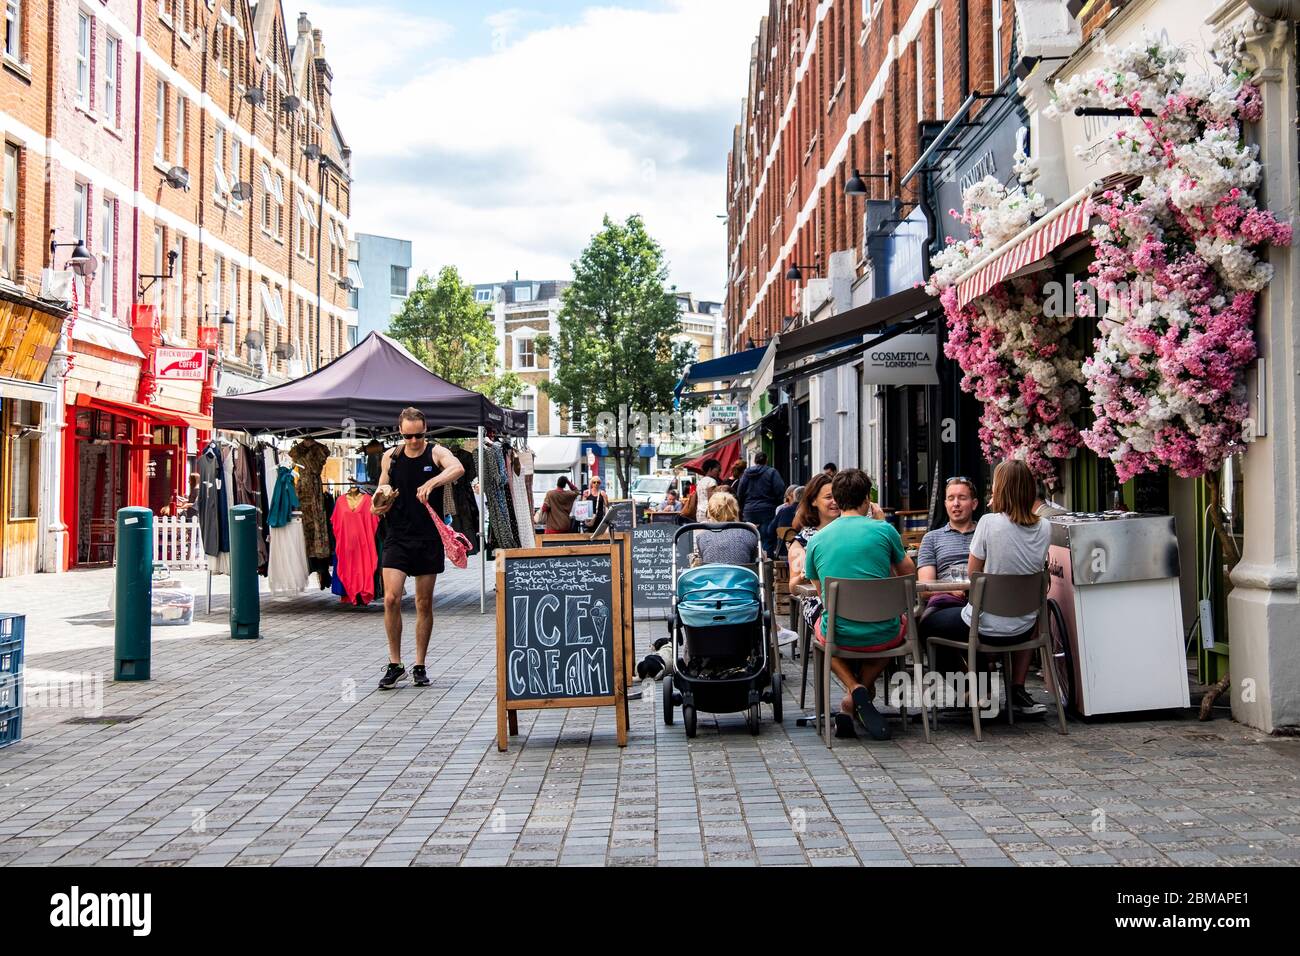 LONDON- High street shopping scene in Balham, an area of south west London Stock Photo